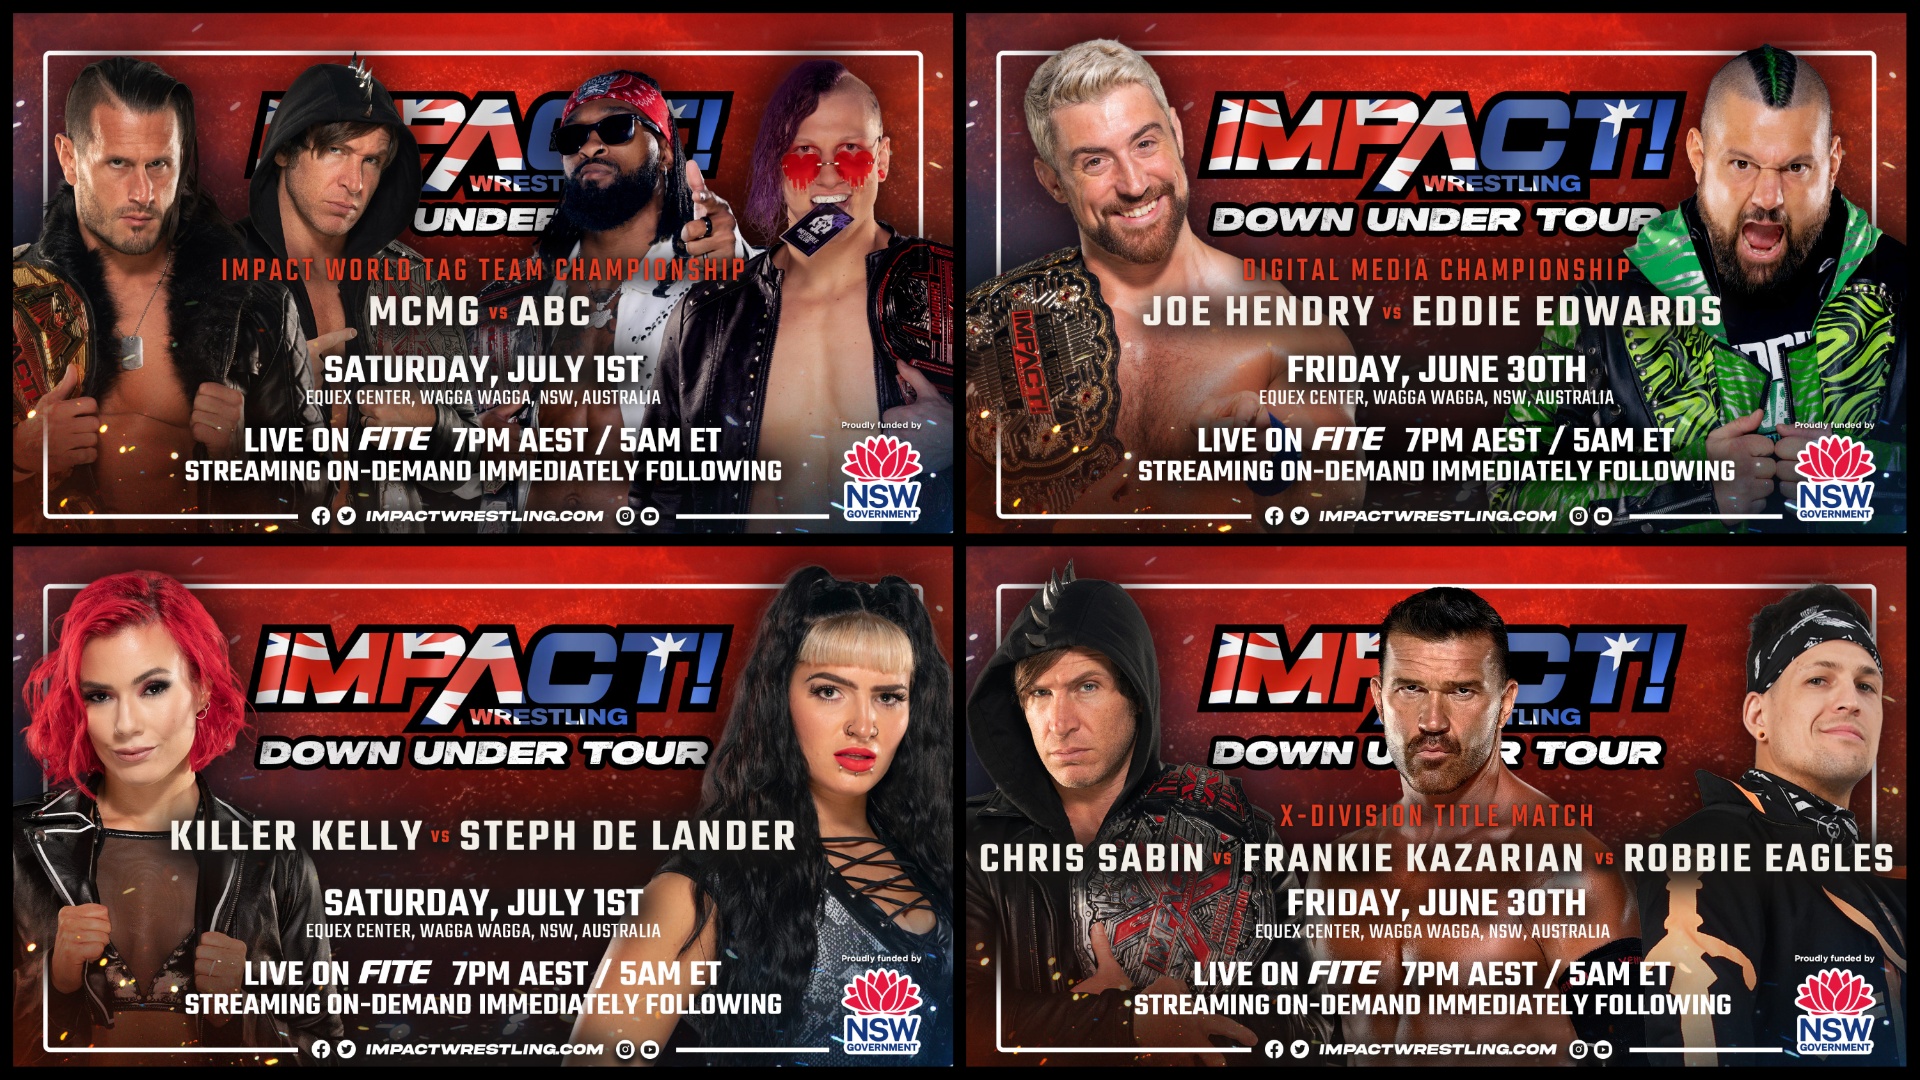 More Championship Matches and Adrenaline-Pumping Action Now Official for the IMPACT Wrestling Down Under Tour